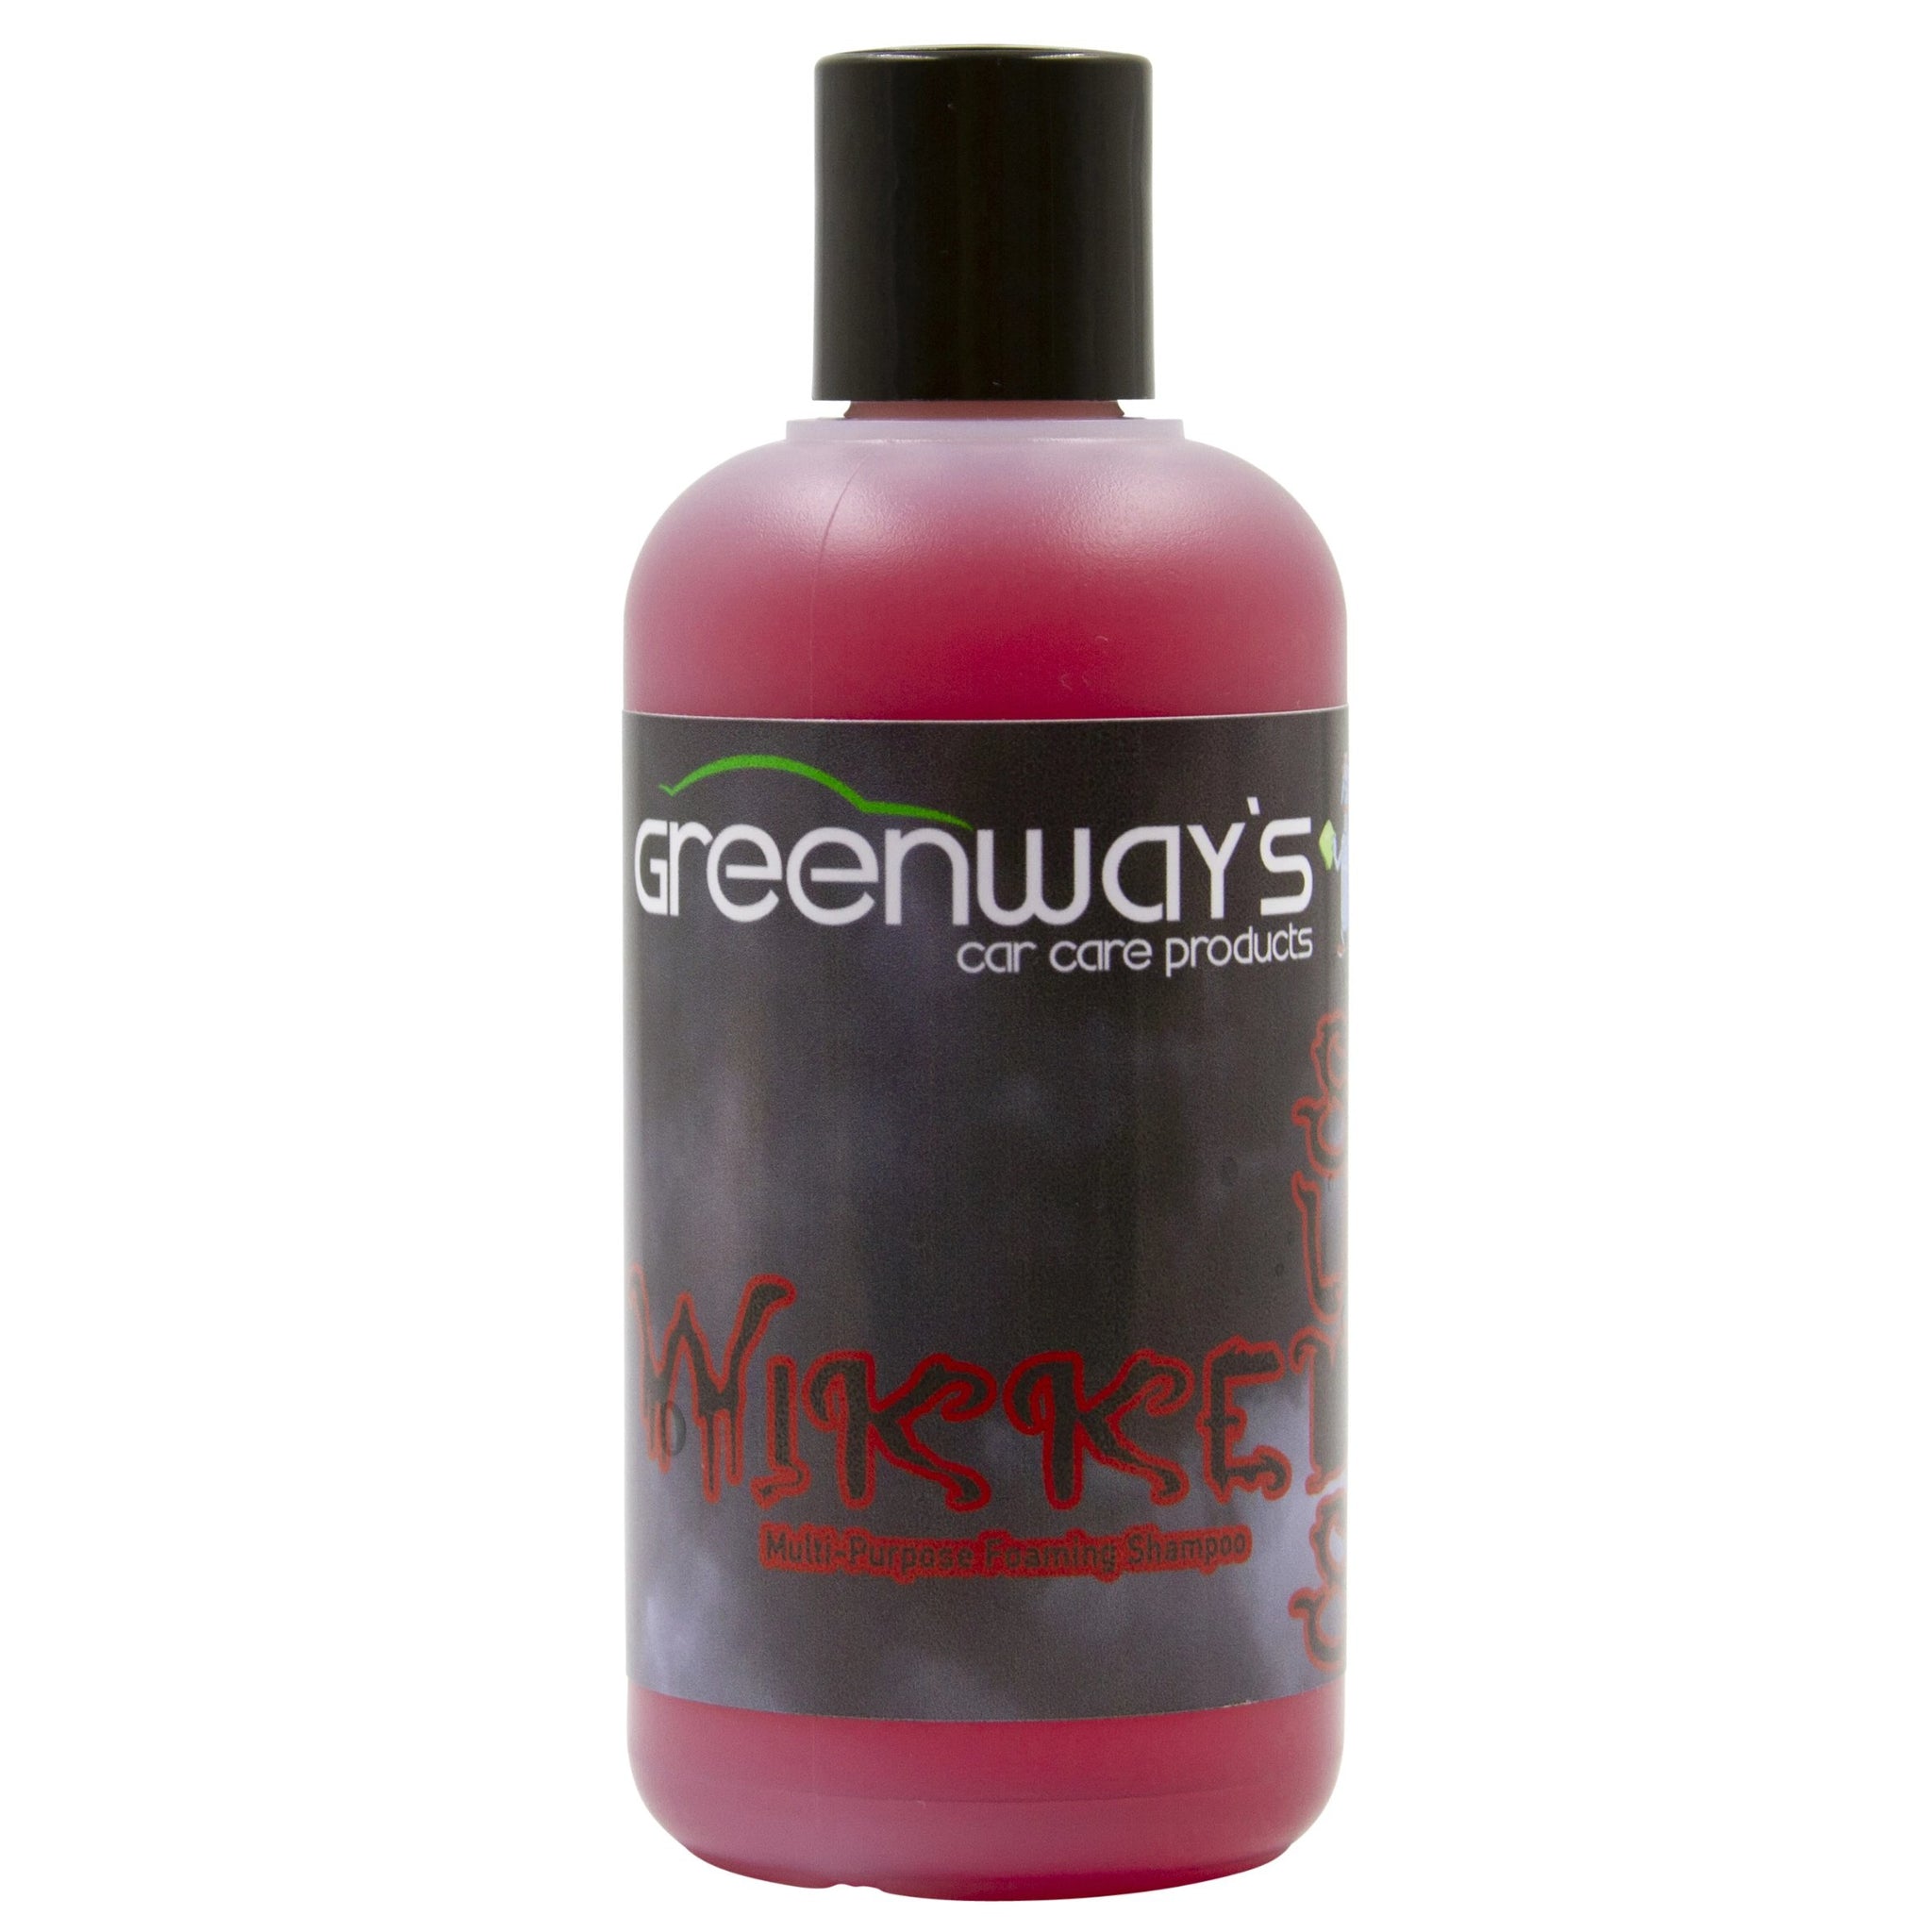 Greenway’s Wikked Suds, high pH and foaming multipurpose car soap, bug, tire and wheel cleaner, foam cannon use, 8 ounces.